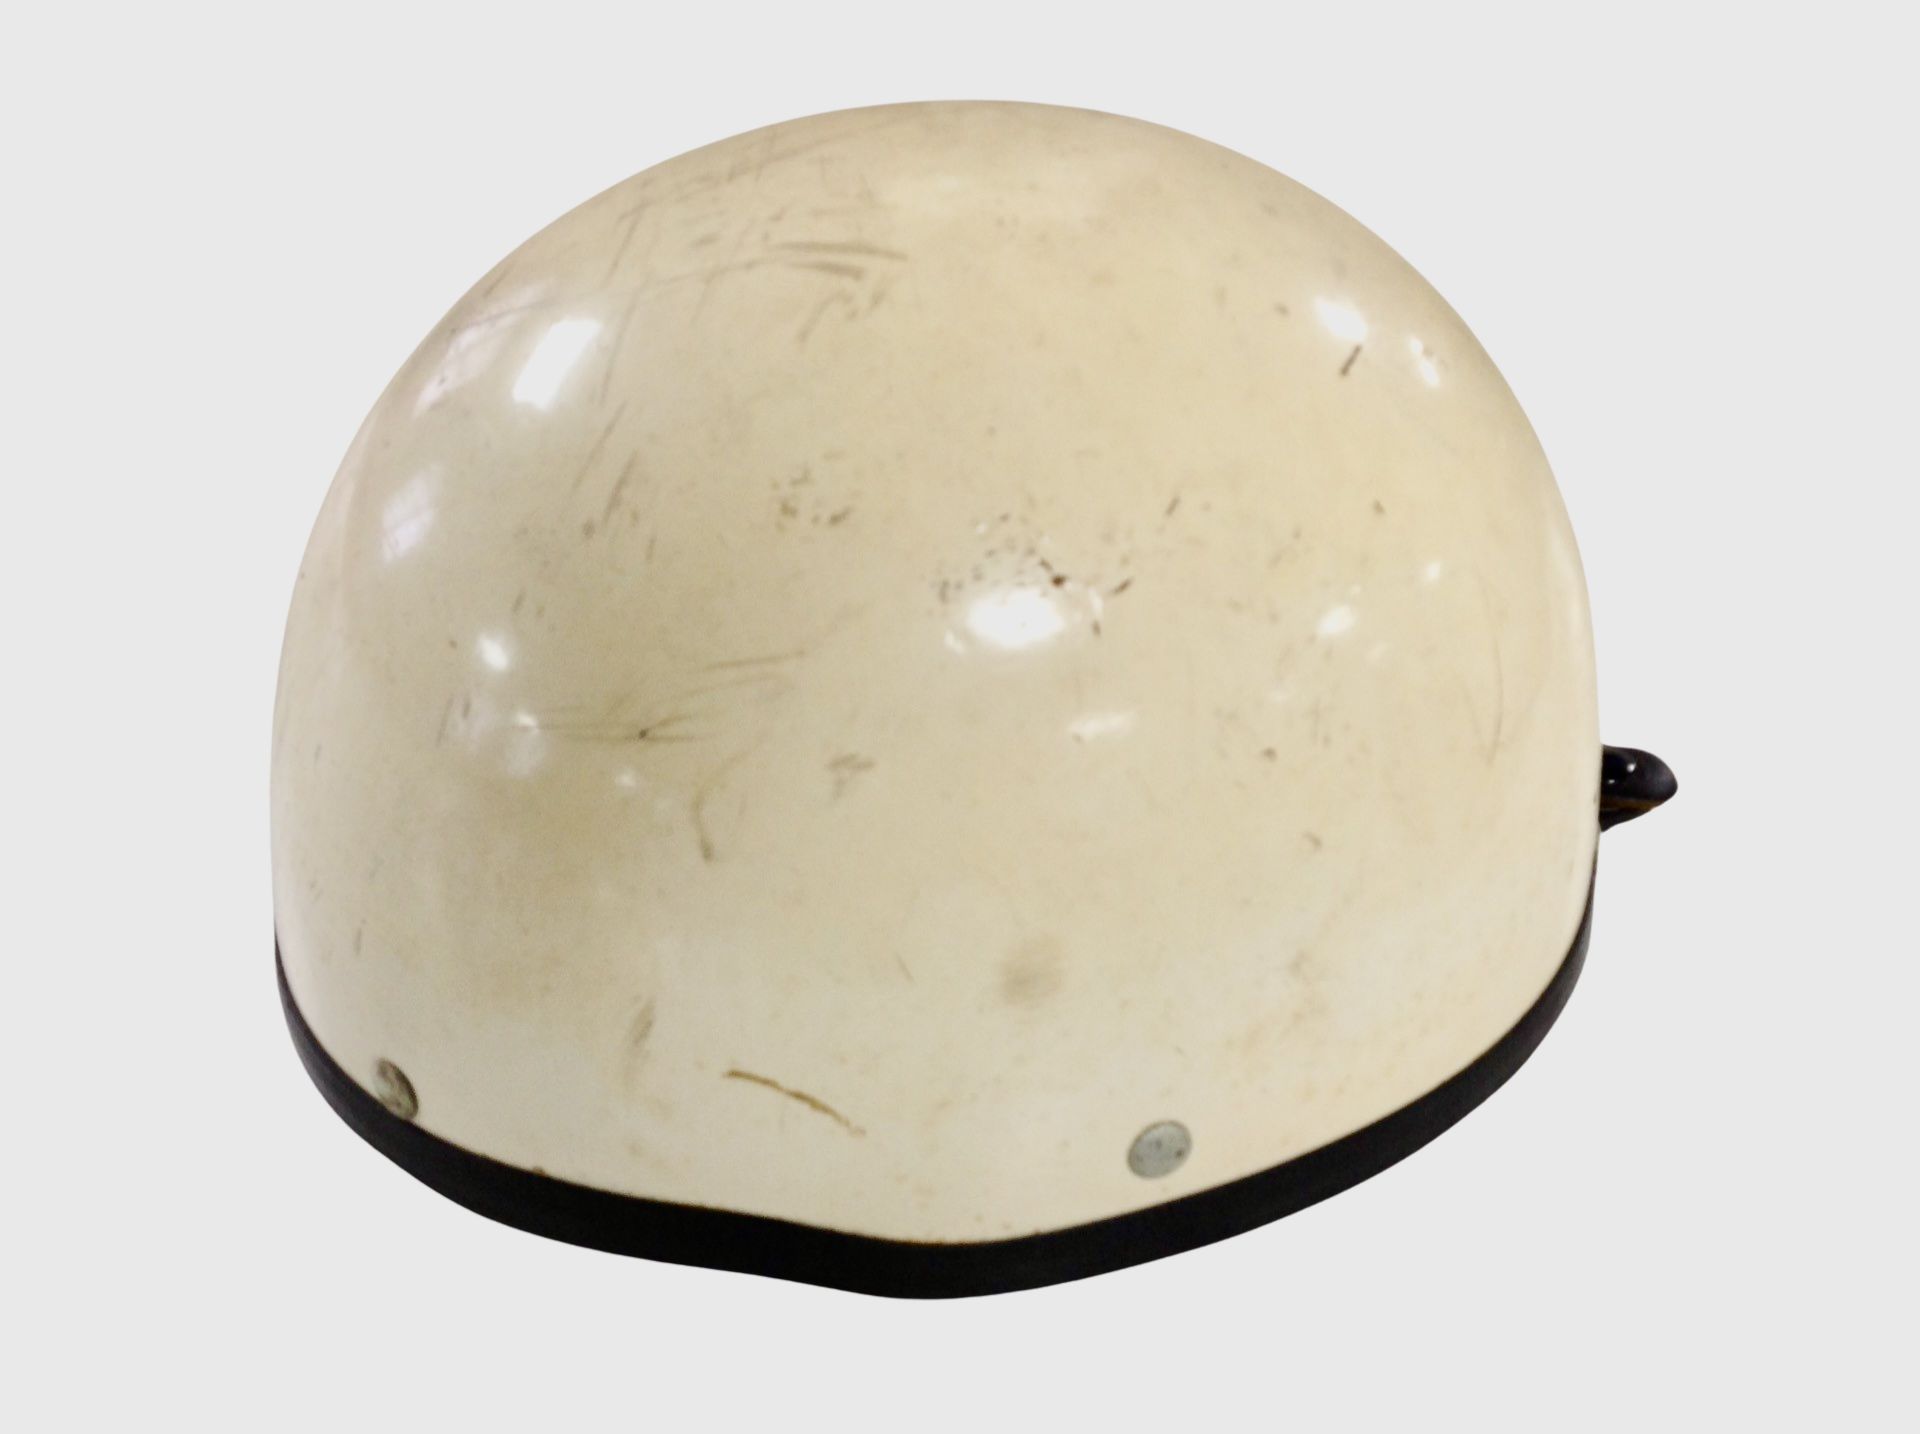 A vintage A Cromwell 'The Noll' motorcycle helmet, size 7.